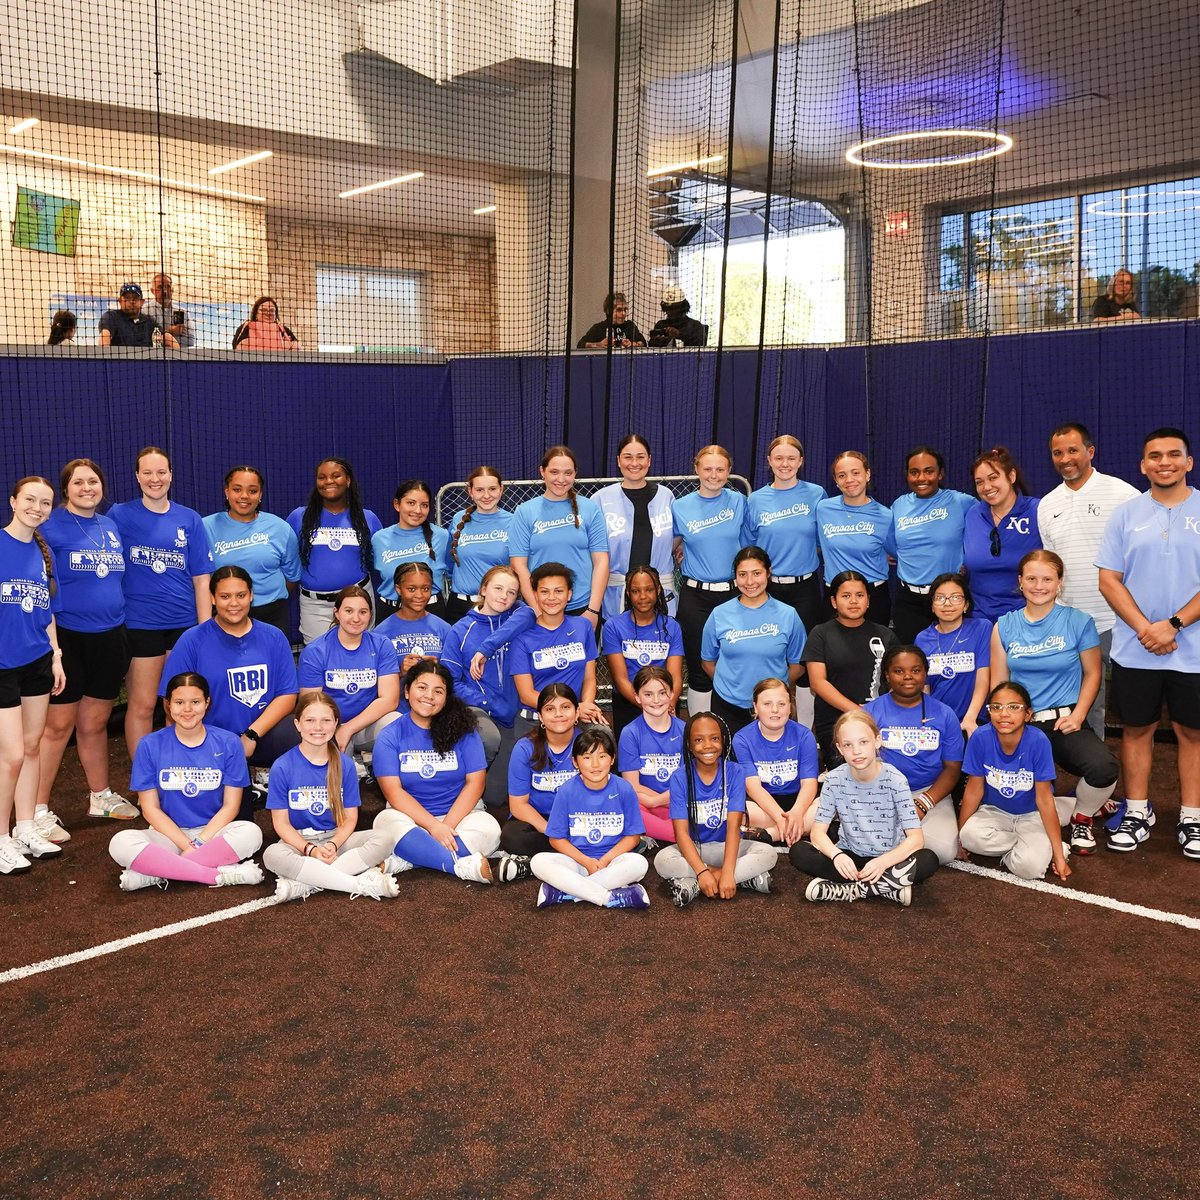 Lauren Chamberlain-Gipson stopped by the KC Youth Academy as part of the MLB Youth Academy Ambassador Tour! Athletes from the NIKE RBI Softball program received pro-level training & advice from one of the all-time best hitters in the game!💥🥎